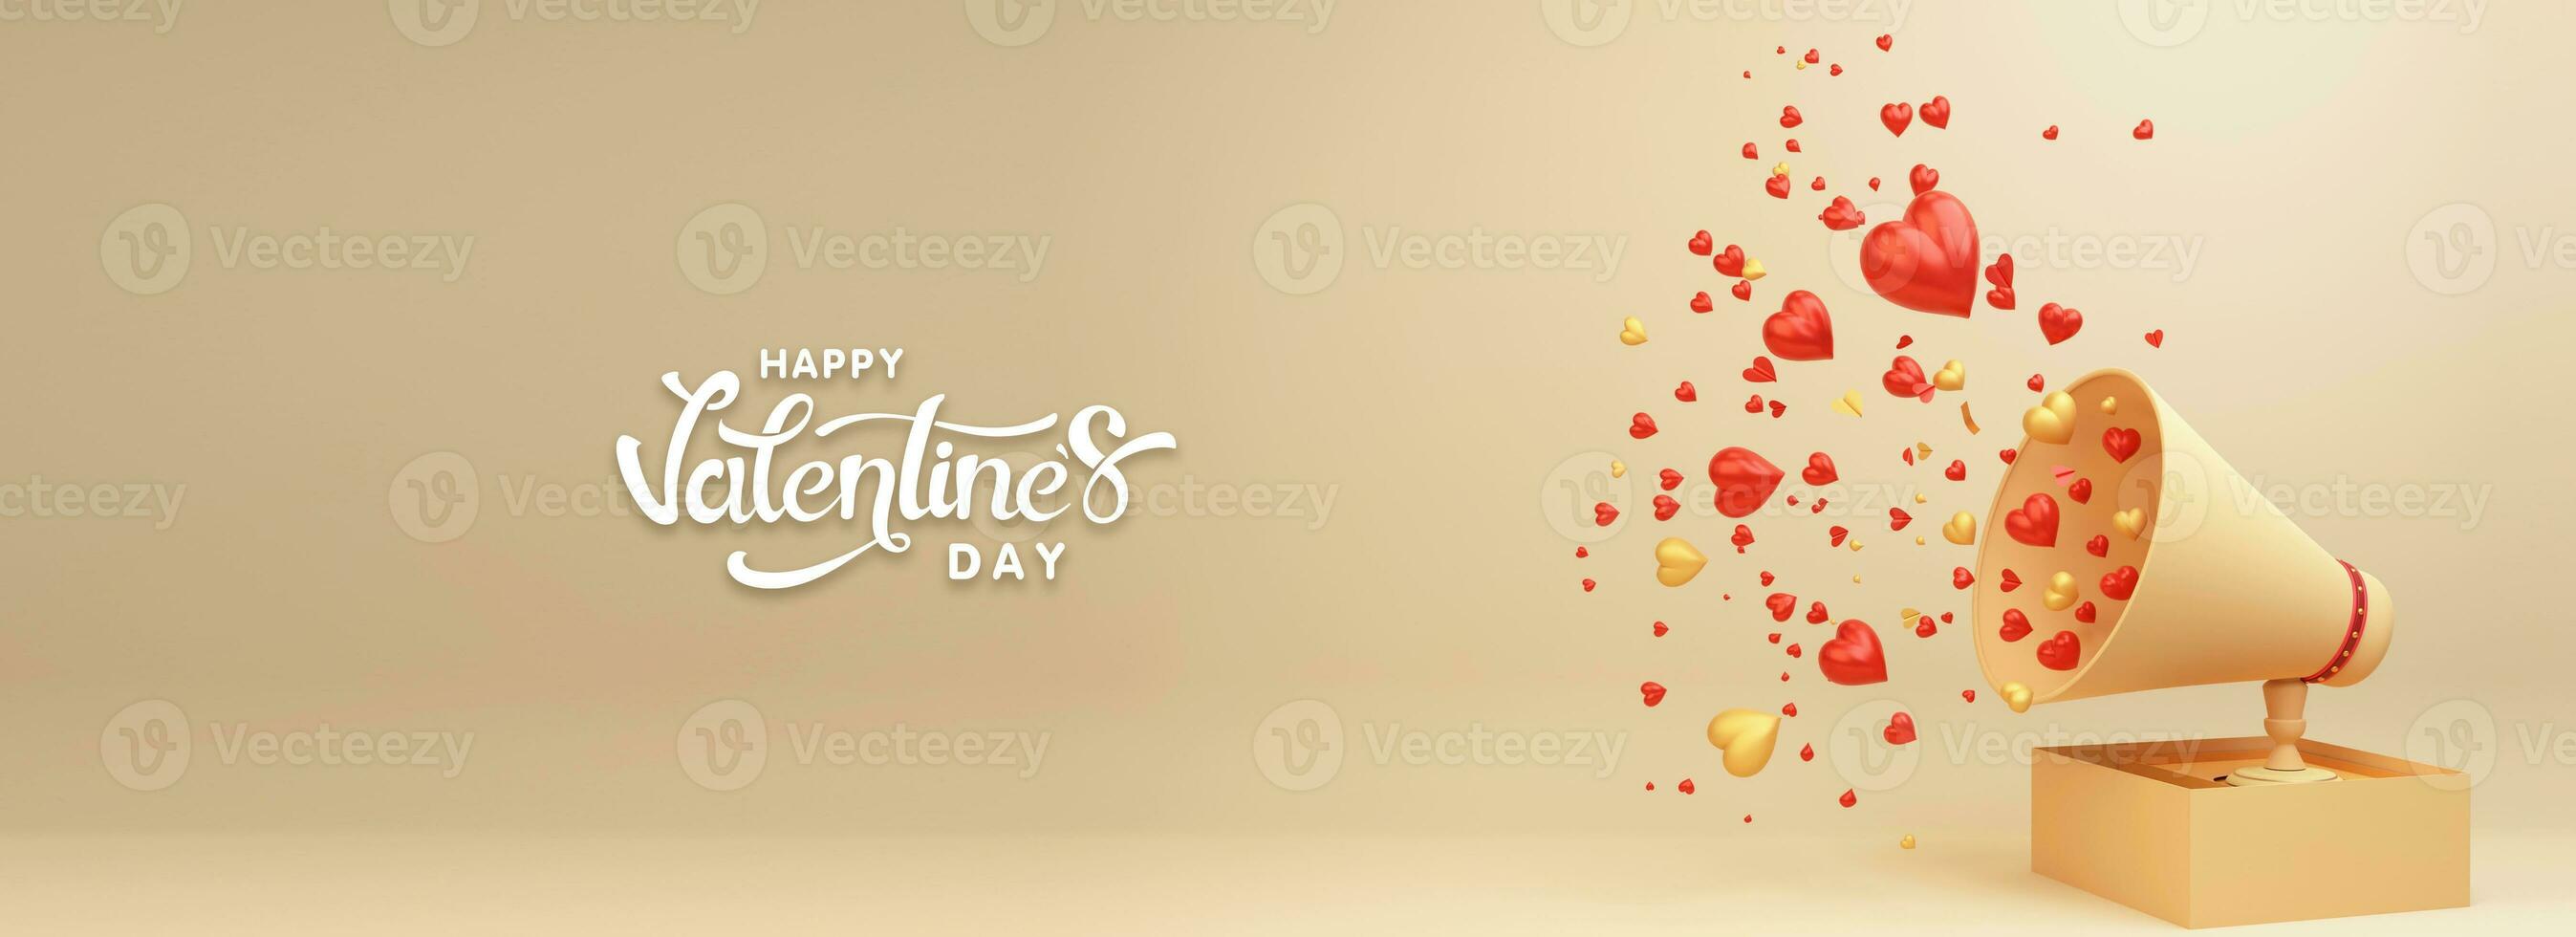 Happy Valentine's Day Header Or Banner Design With 3D Render, Heart Shapes With Gramophone. photo